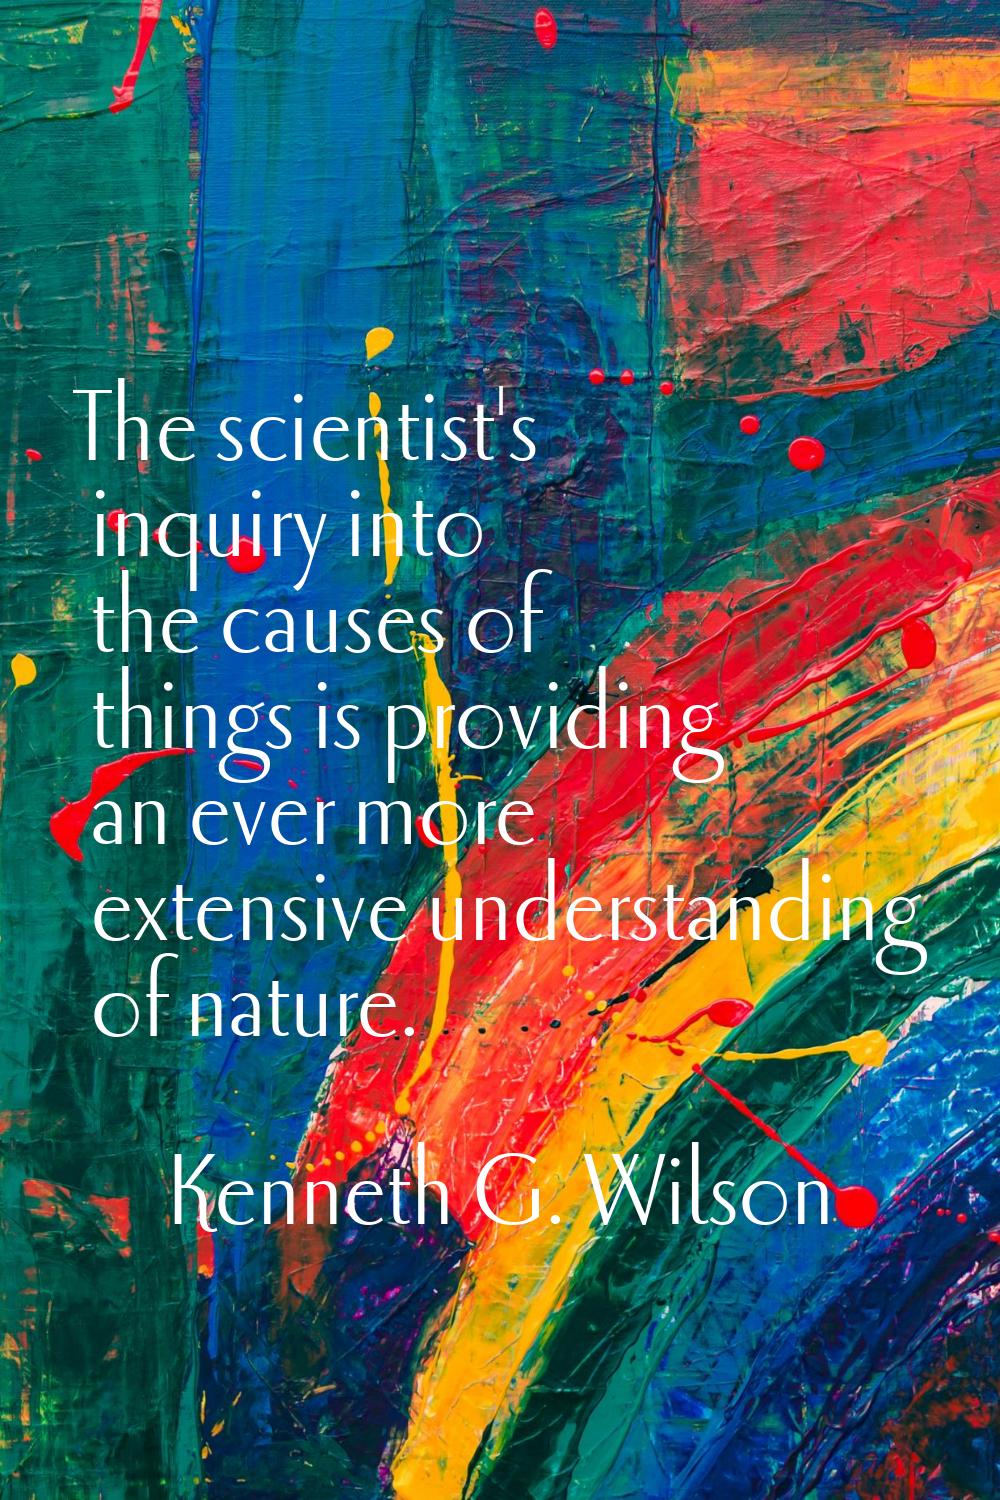 The scientist's inquiry into the causes of things is providing an ever more extensive understanding